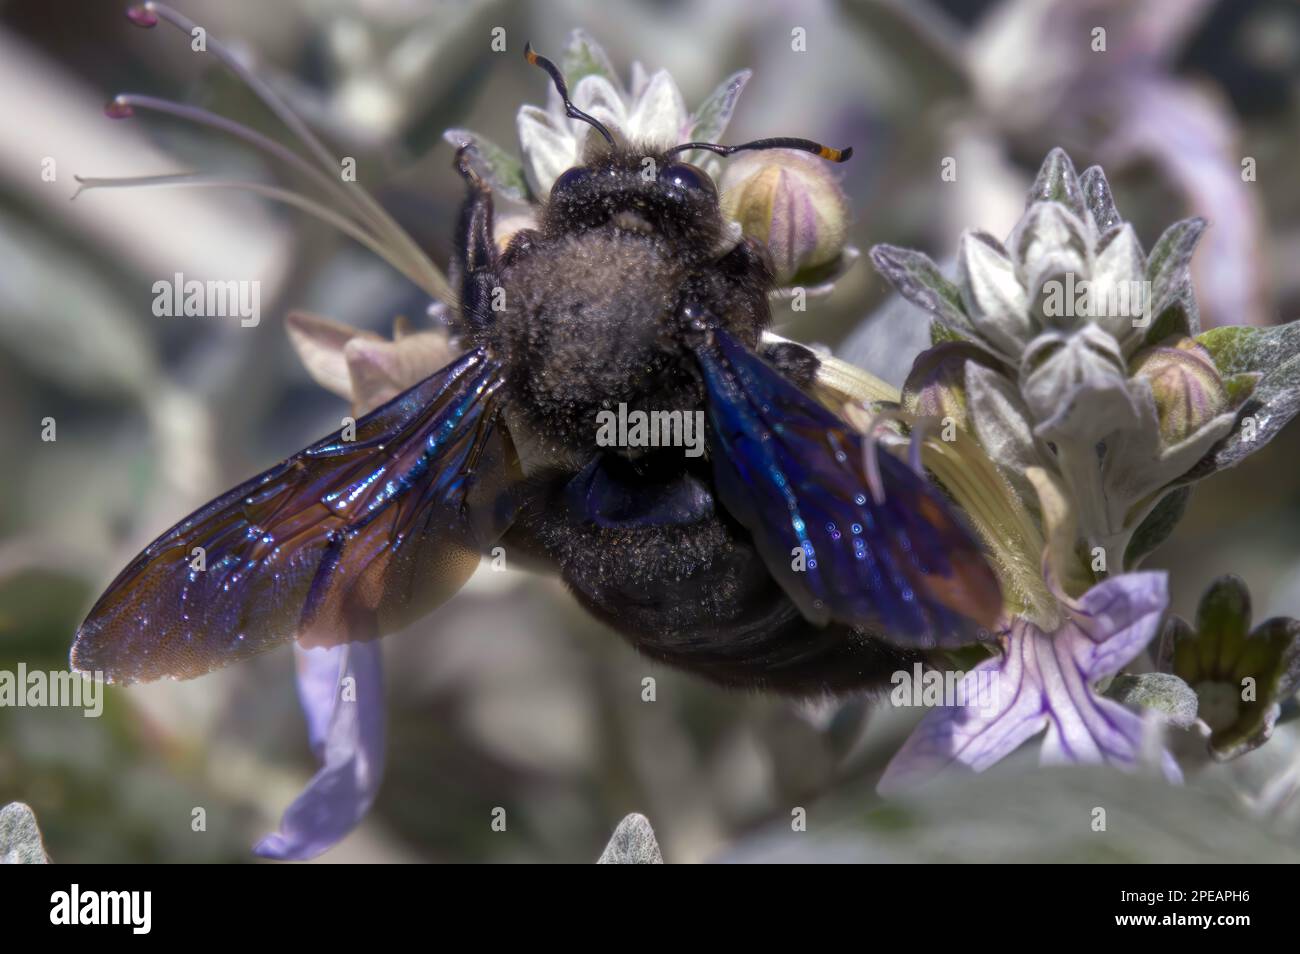 Xylocopa violacea or violet carpenter bee, close up Stock Photo